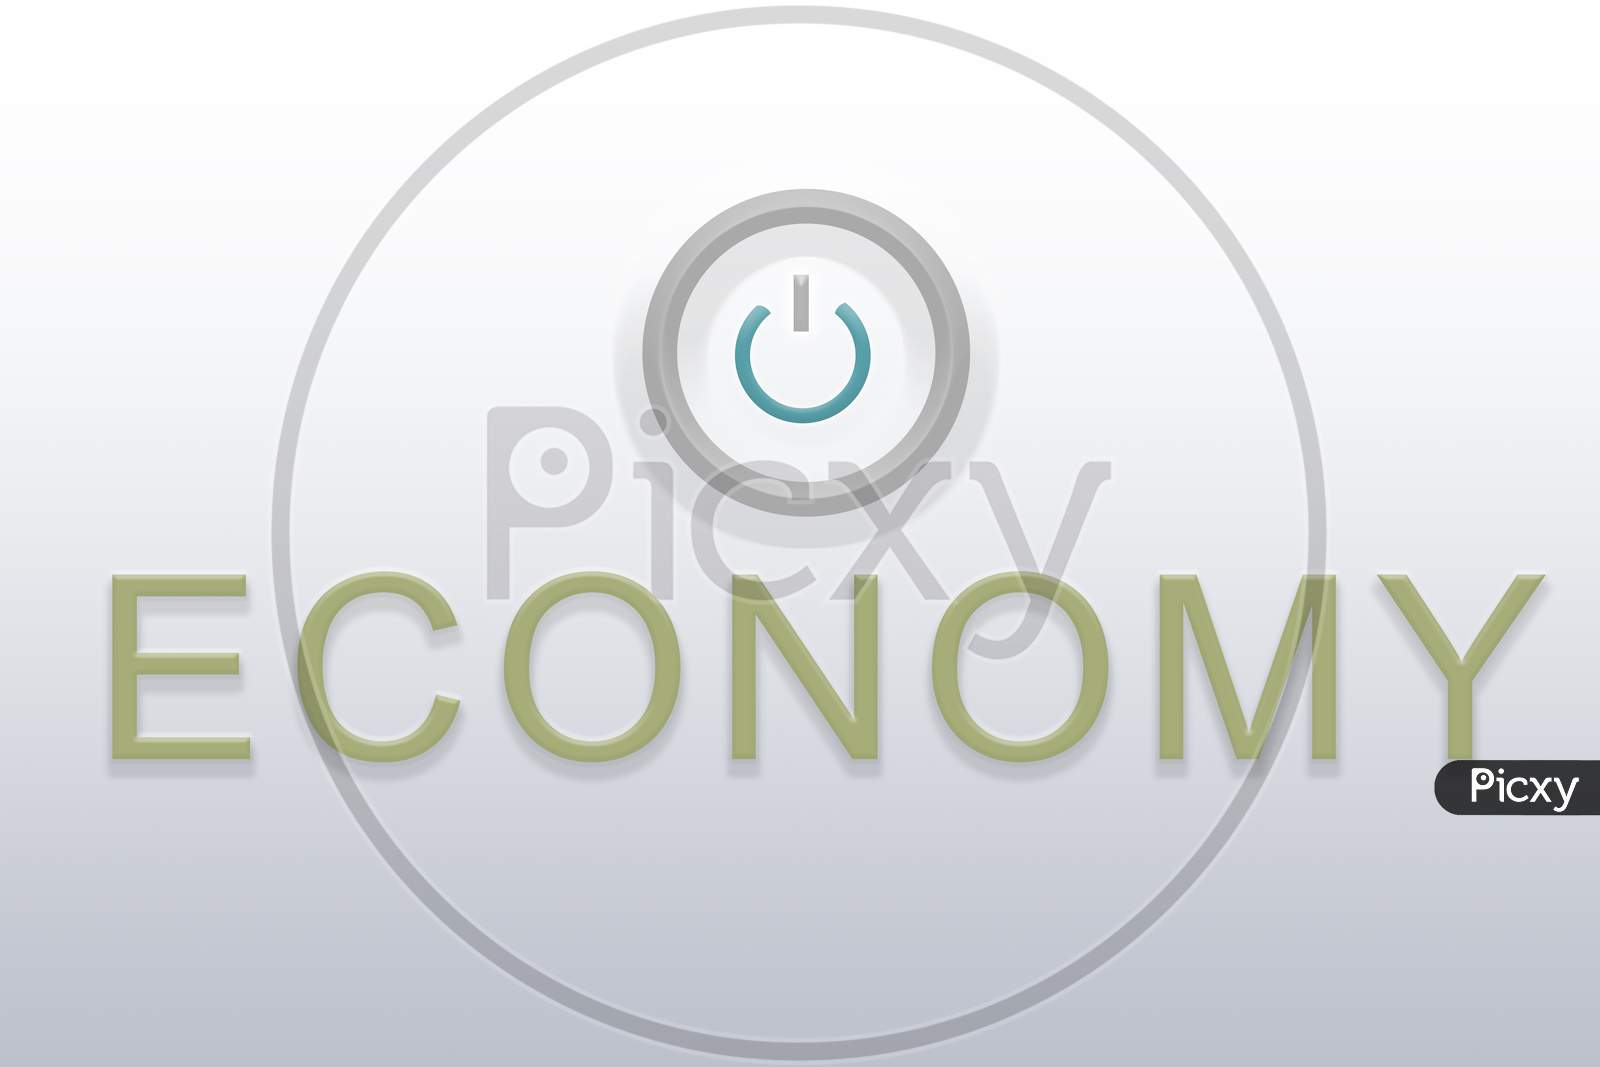 Concept Of Opening Or Restarting Economy Or Economic Activities Showing With Start Button.